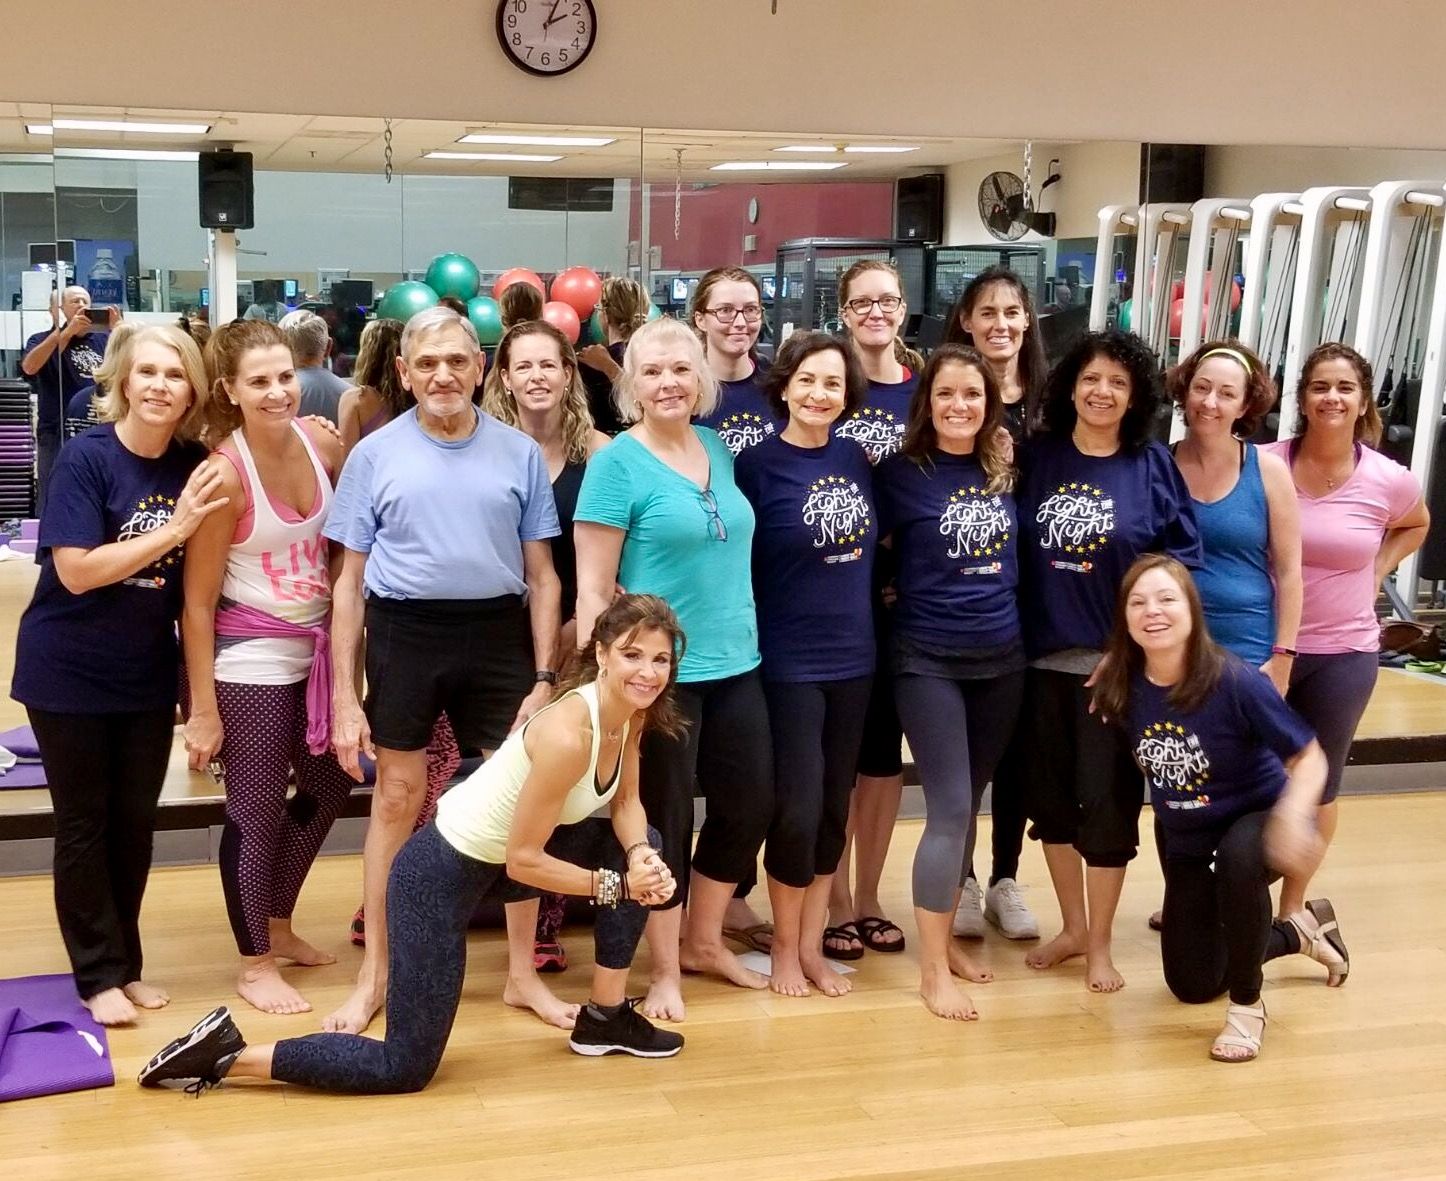 Yoga for a Cure with Team Holtzman